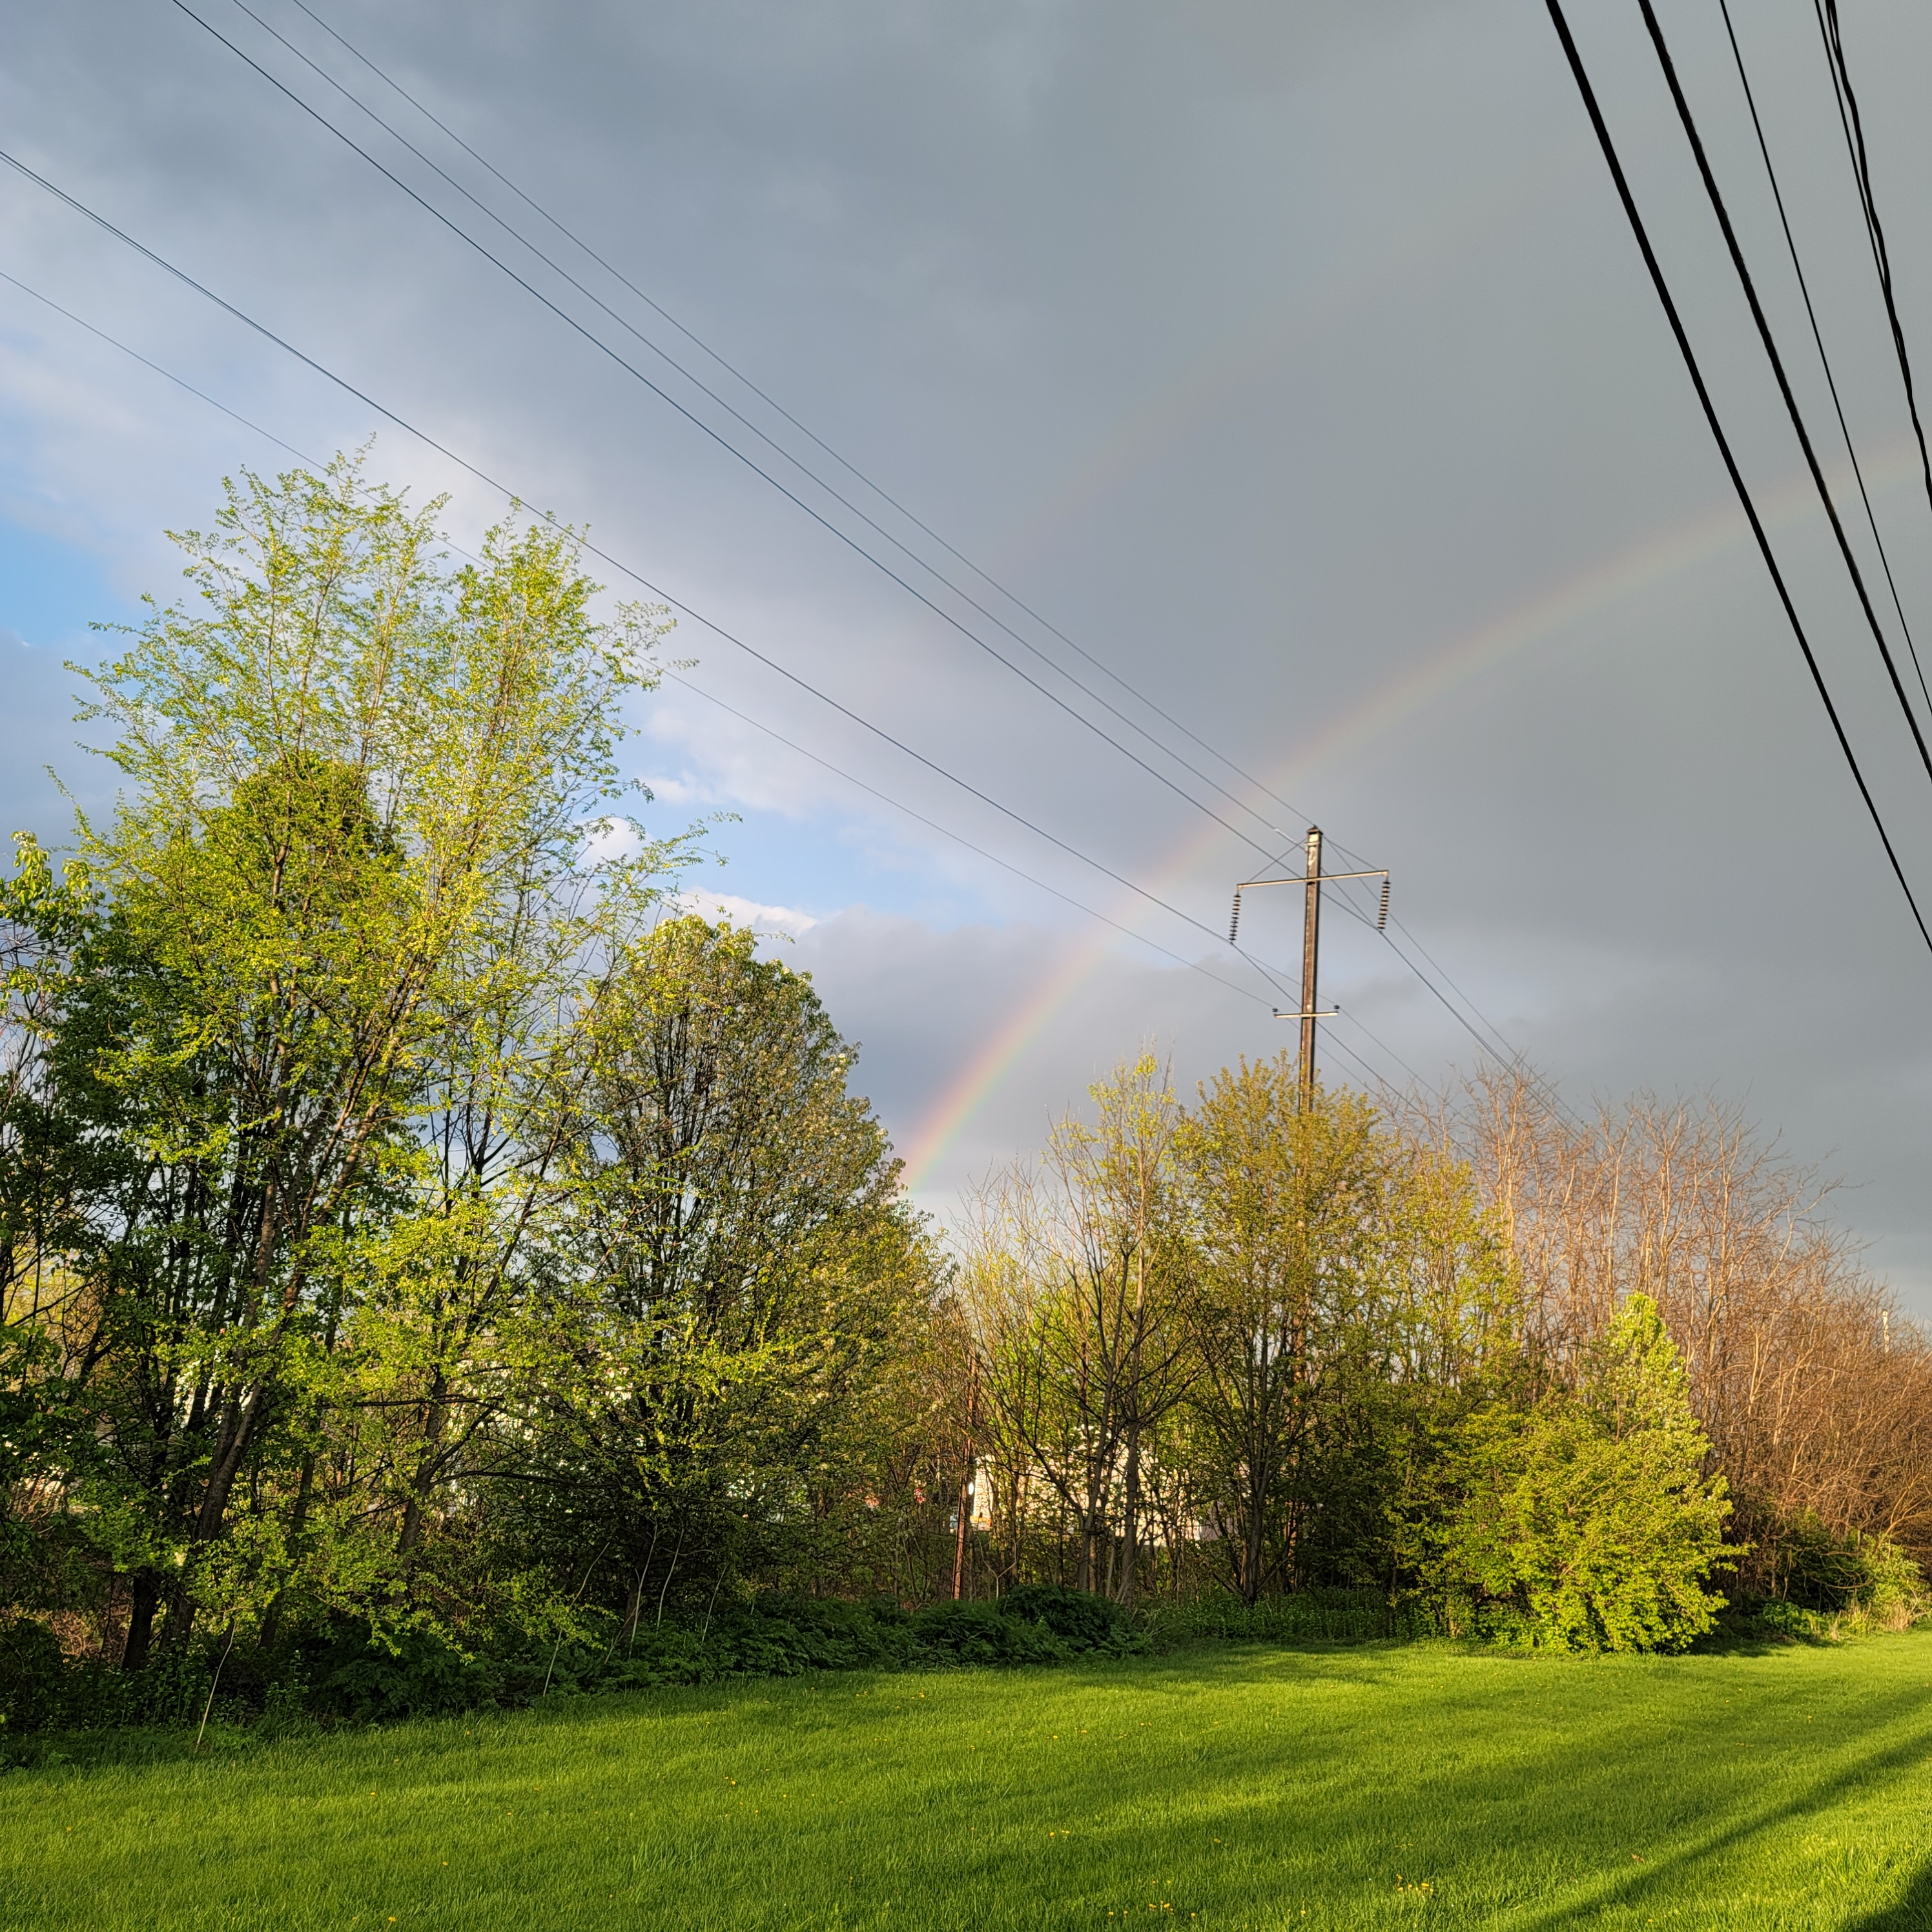 Here is a photo of part of the first rainbow of 2021 here in Mount Joy and it was a double rainbow.